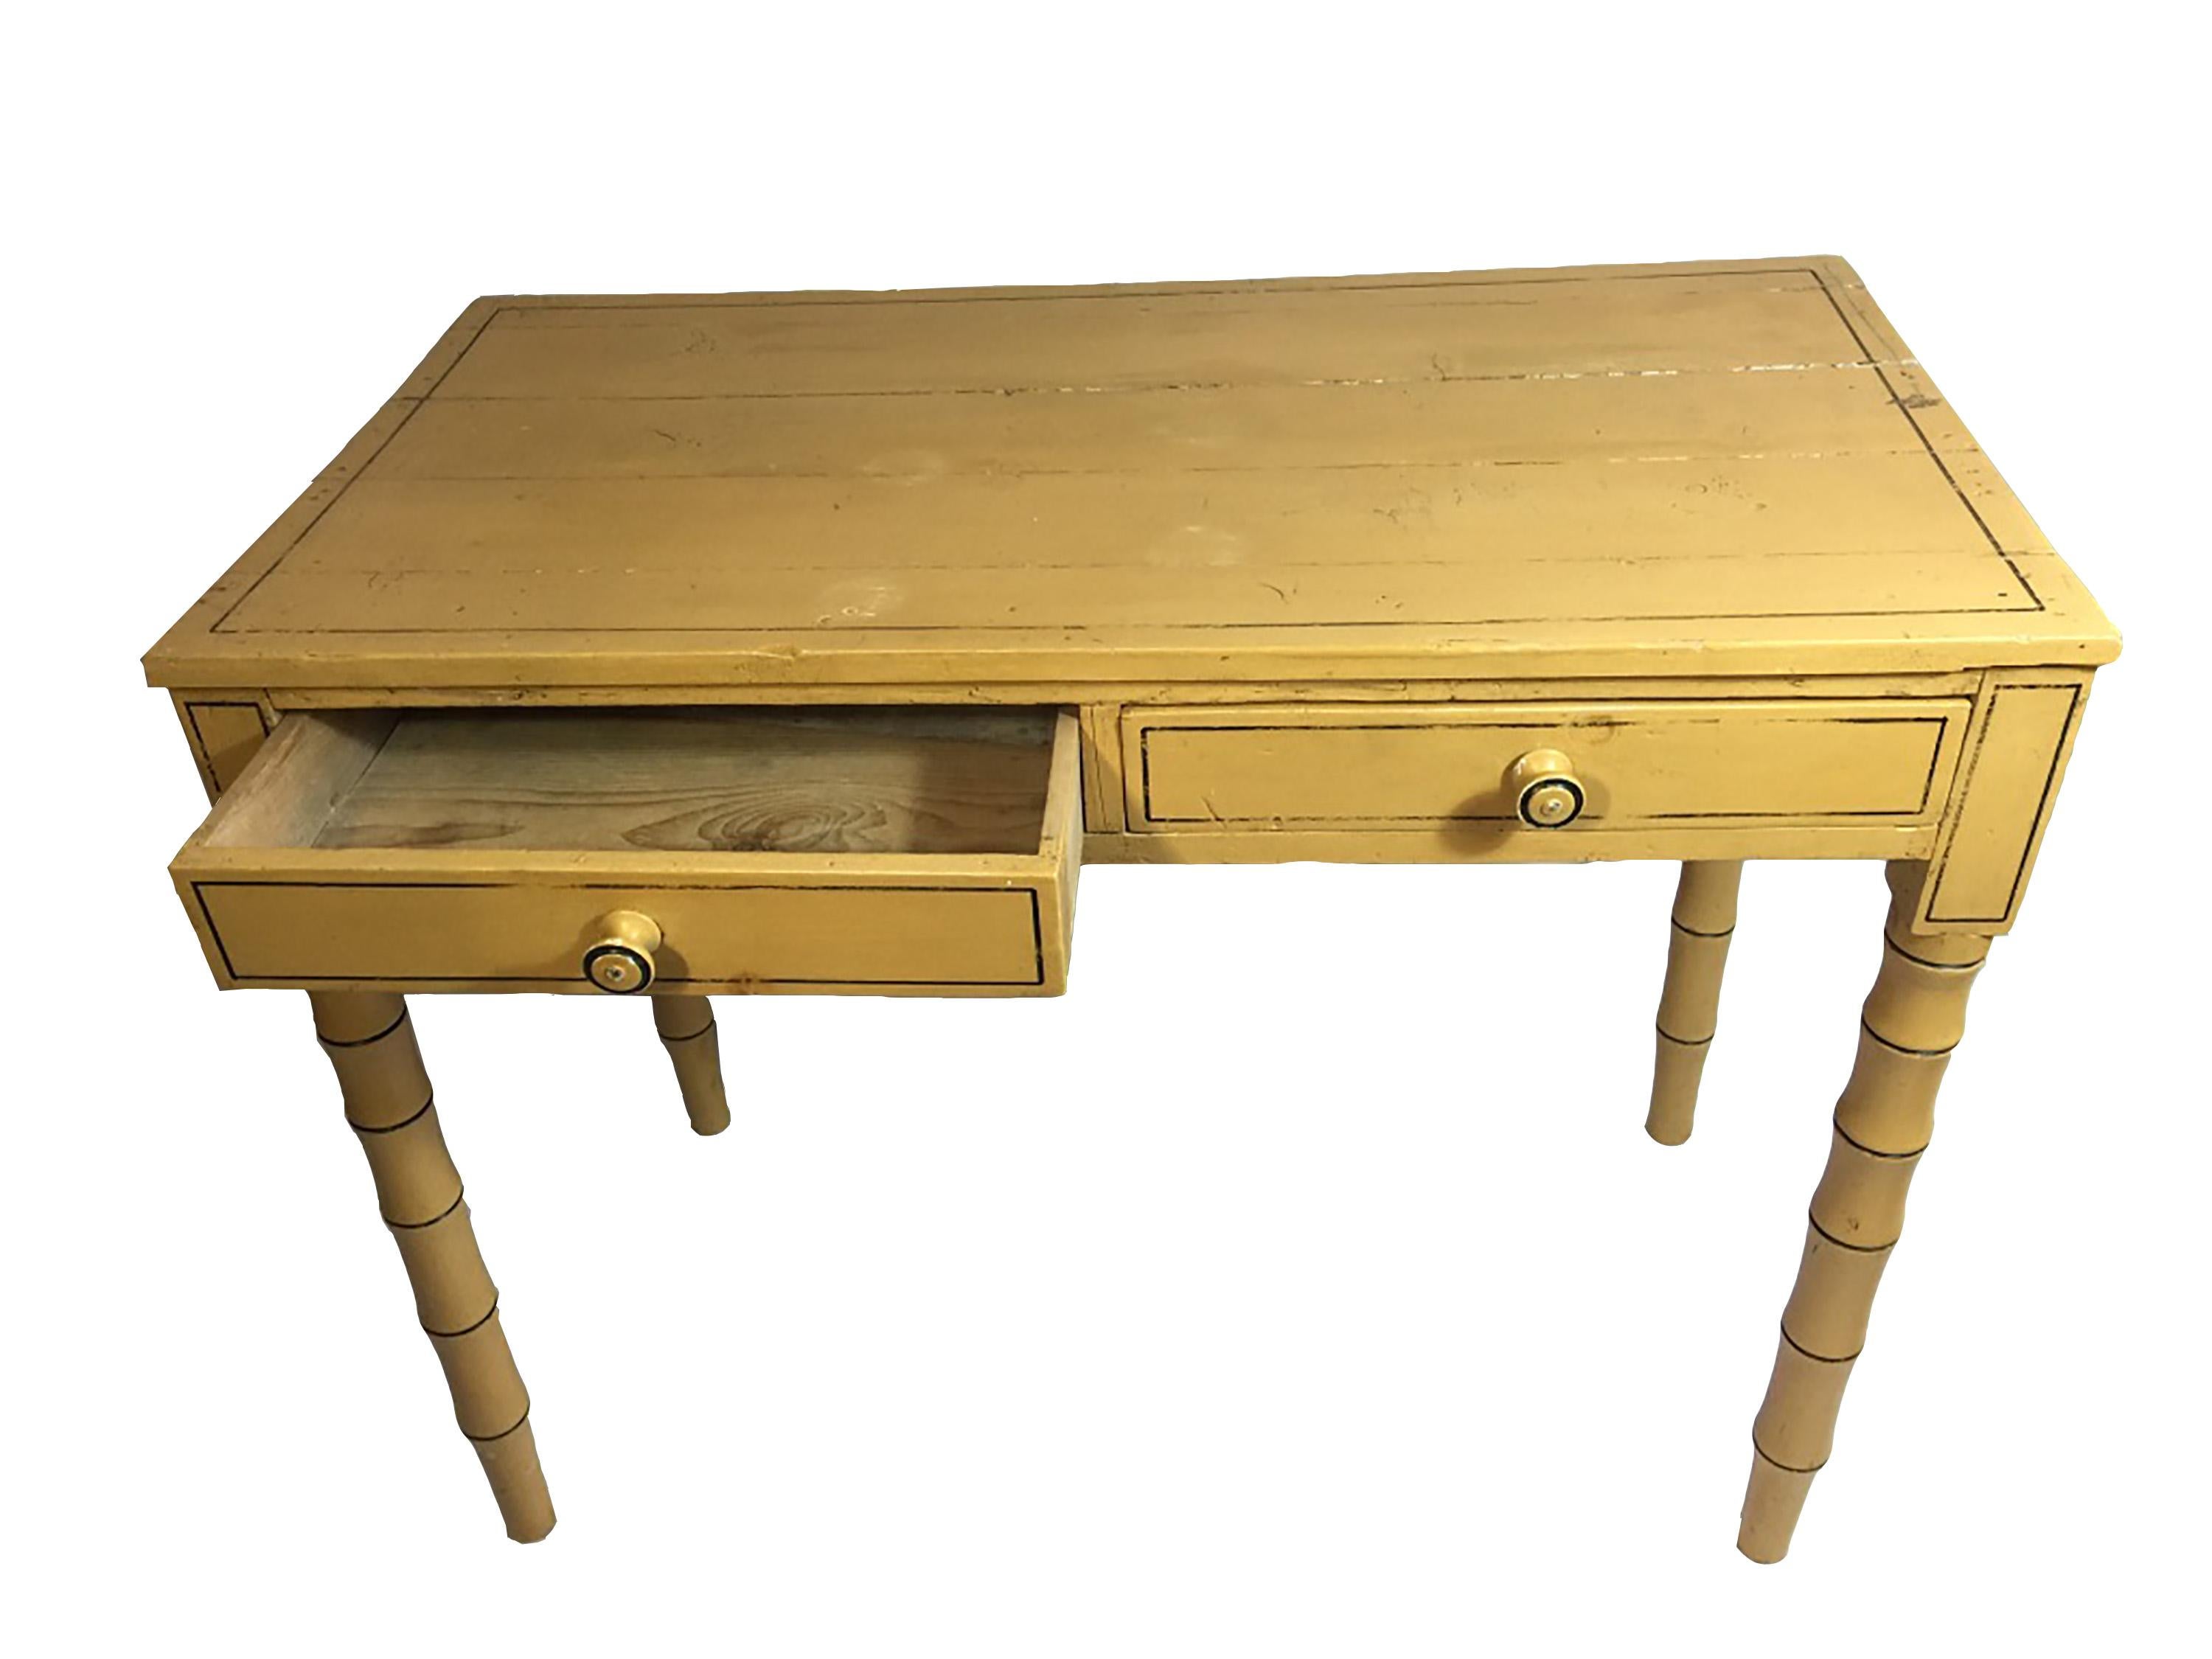 Regency yellow painted and decorated writing table with faux bamboo legs and two drawers.